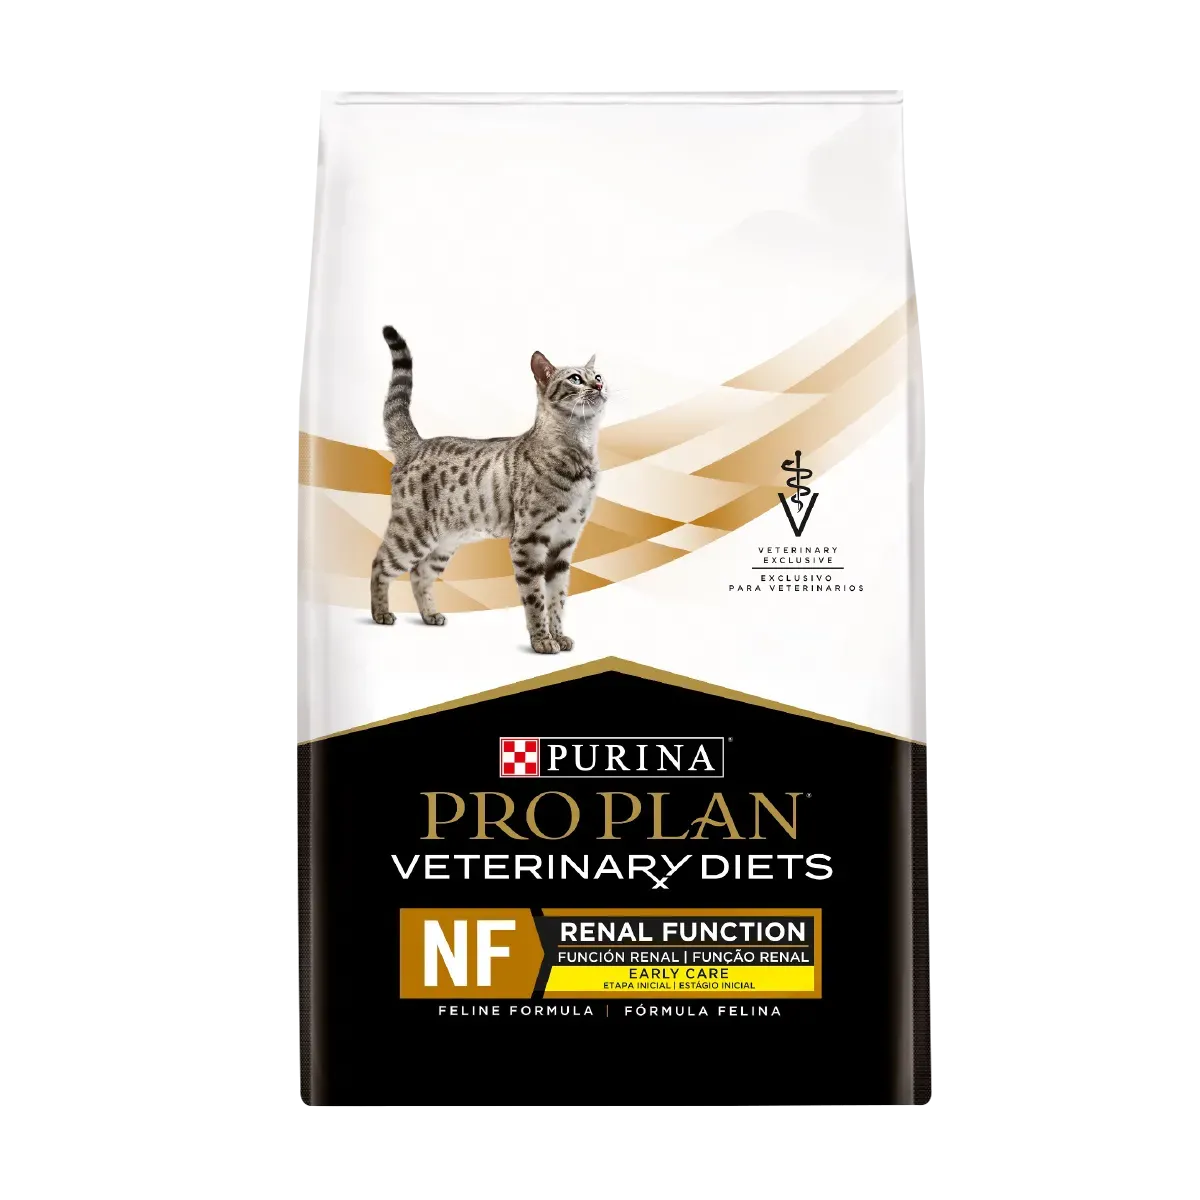 purina-pro-plan-veterinay-diets-cat-nf-renal-function-early-care.webp